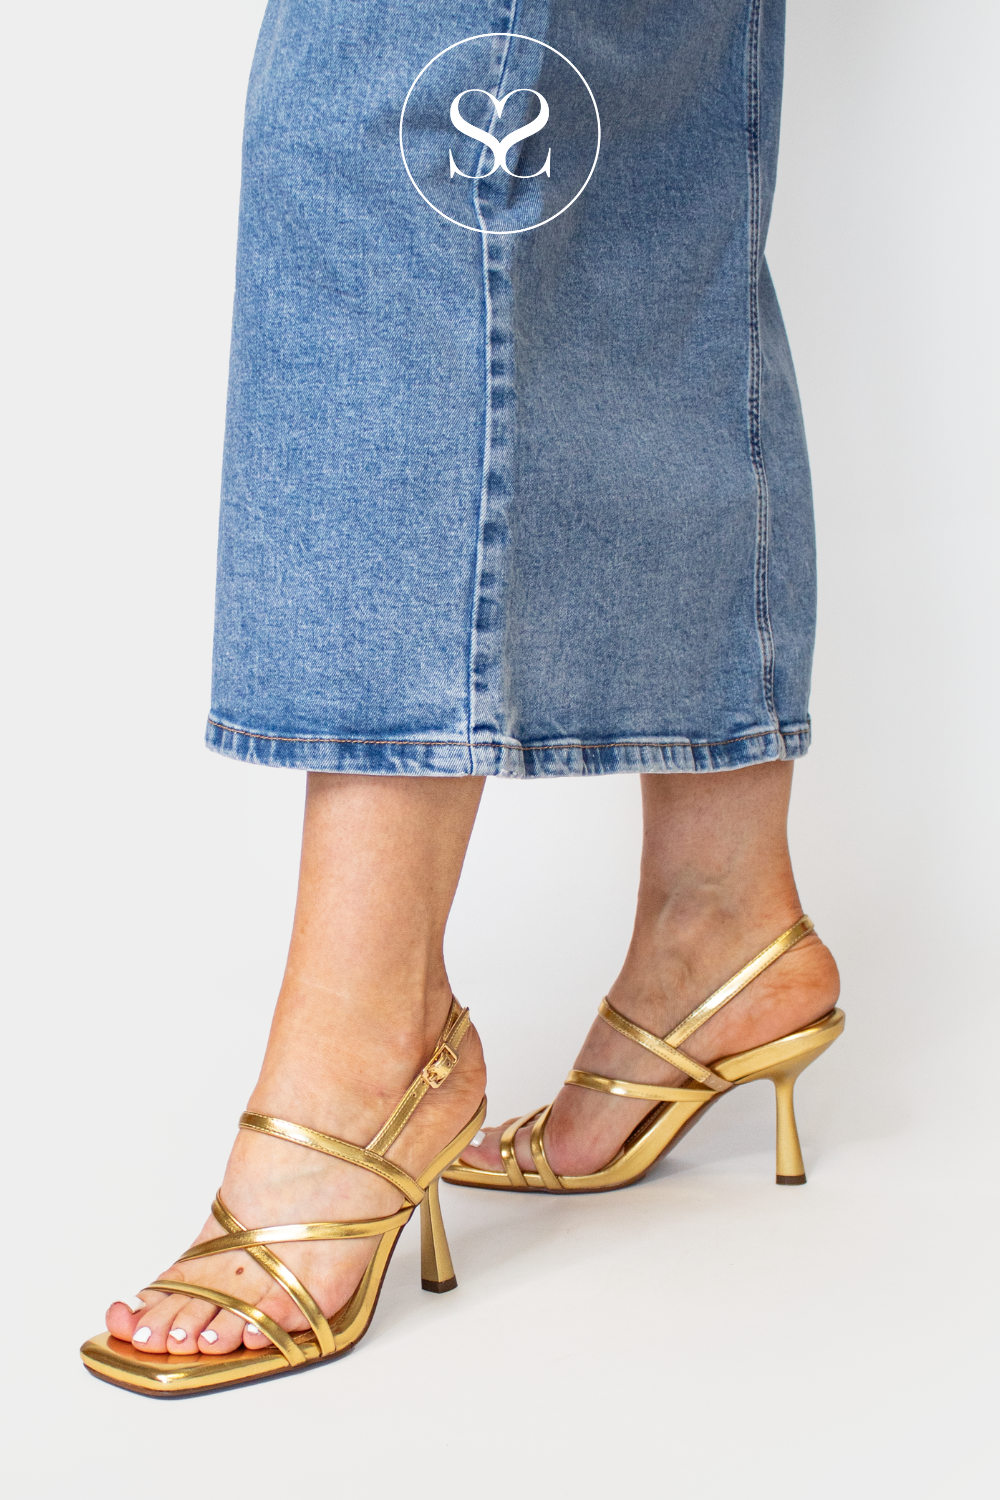 Comfortable Gold strappy sandals from Lodi - Morian cushioned heeled sandals